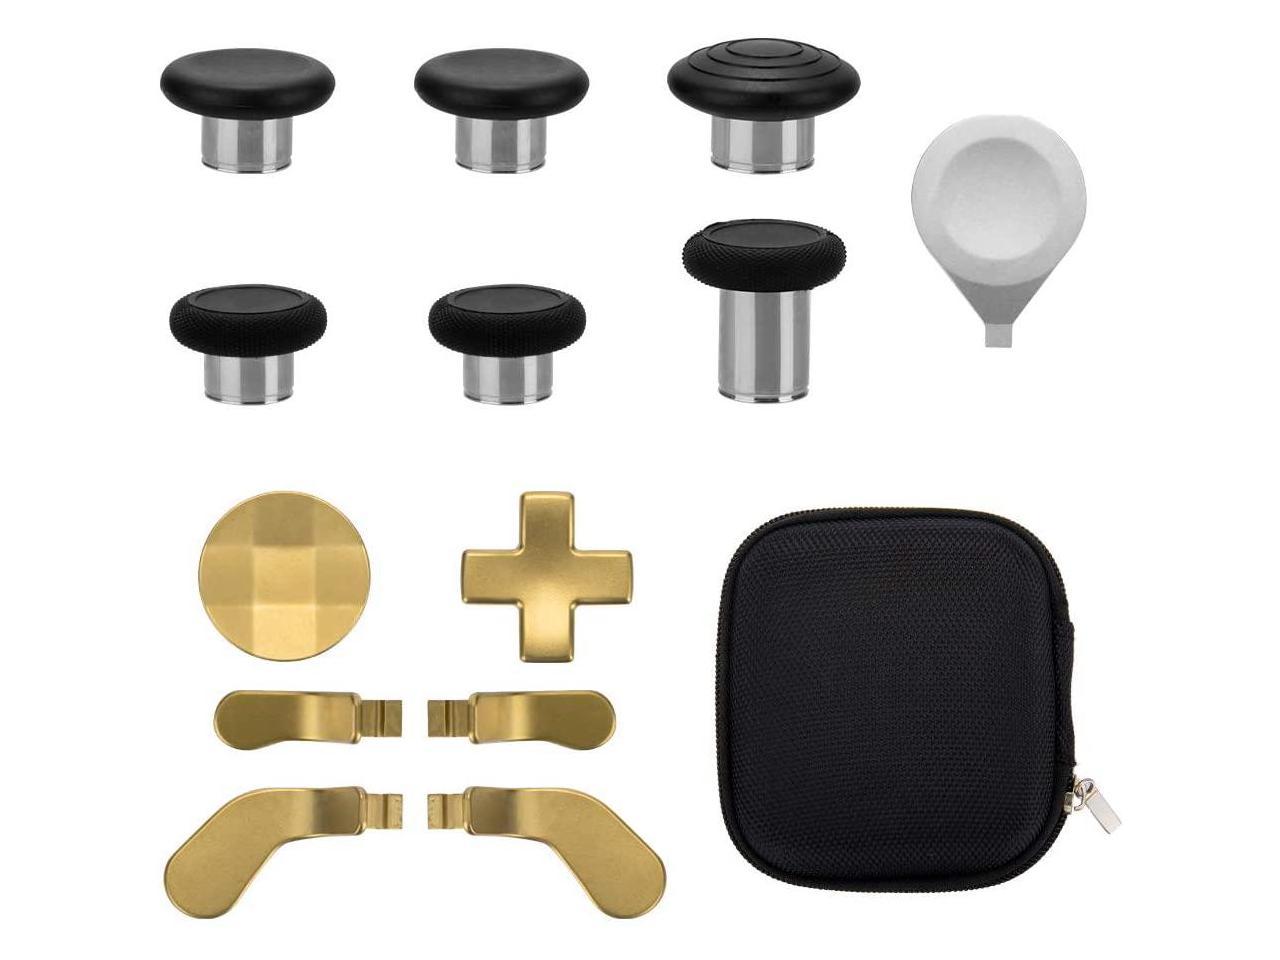 Elite Series 2 Controller Accessories Mod Swap Joysticks Paddles Adjustment Tool Gold D-Pads Metal Thumbsticks Replacement Parts for Xbox One Elite Series 2 Controller Model 1797 